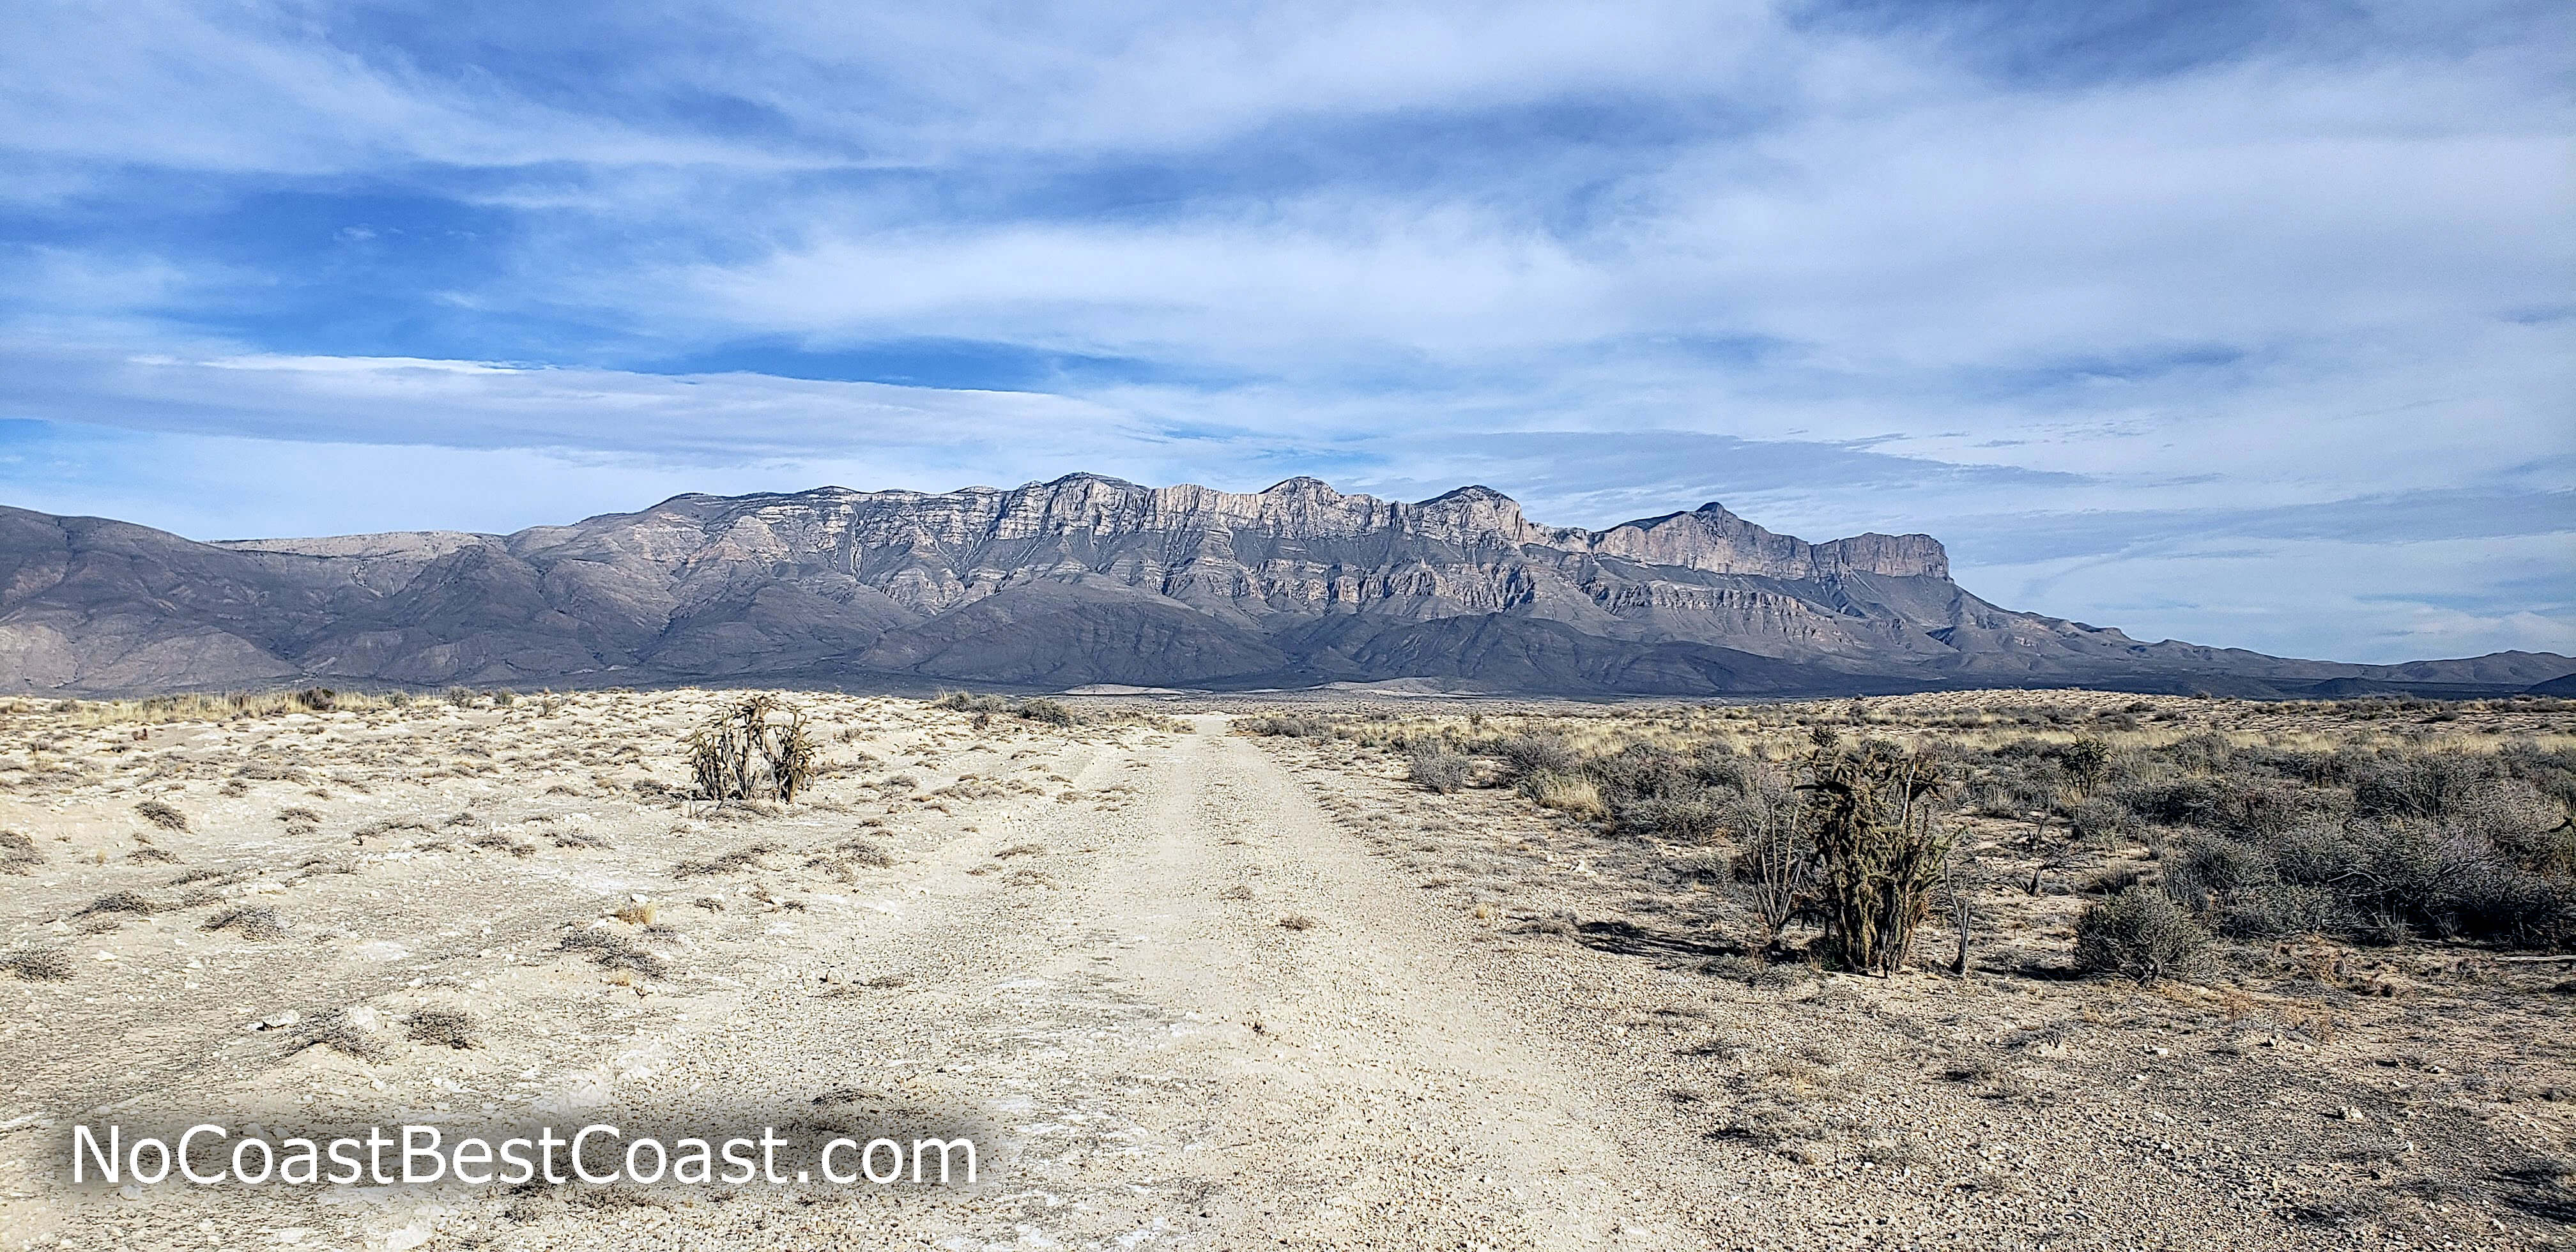 The Guadalupe Mountains rising above the desert as seen from the old road